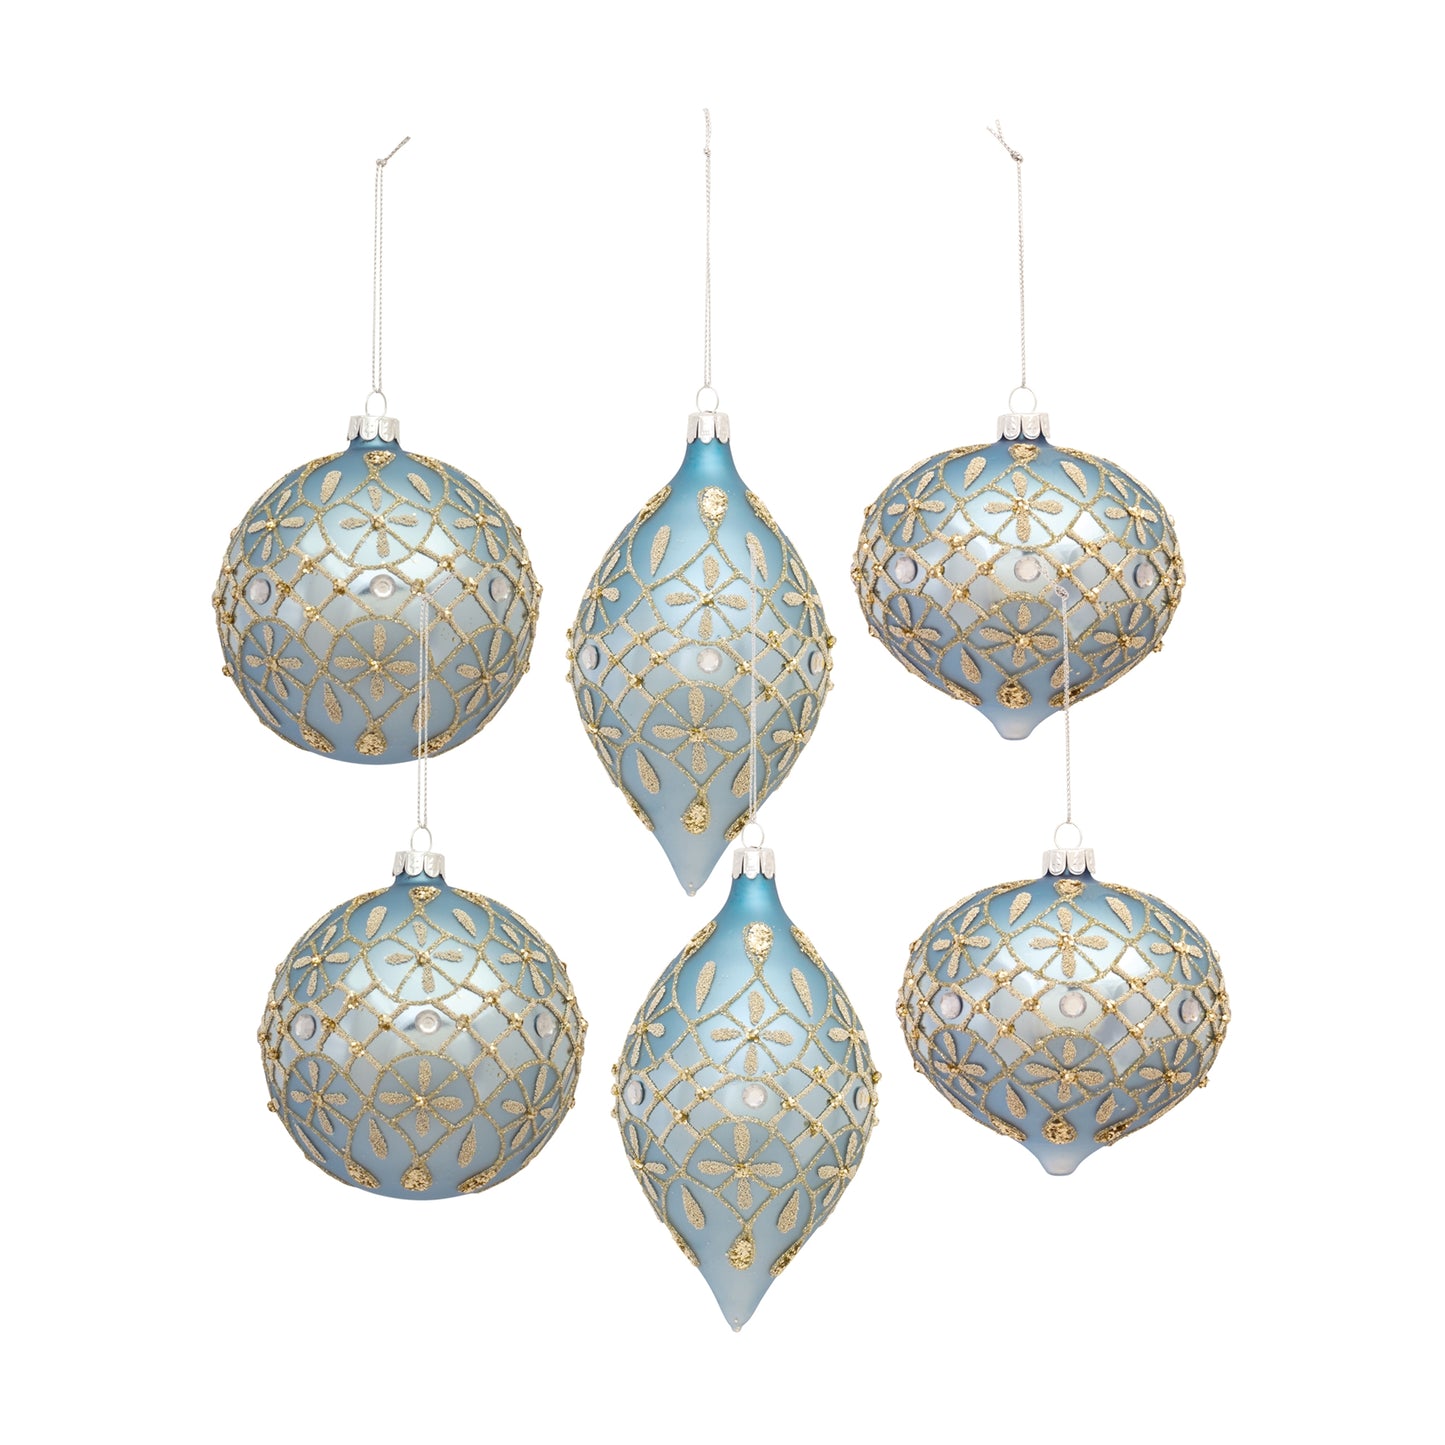 Blue and Silver Ombre Ornament with Ornate Gold Accent (Set of 6)